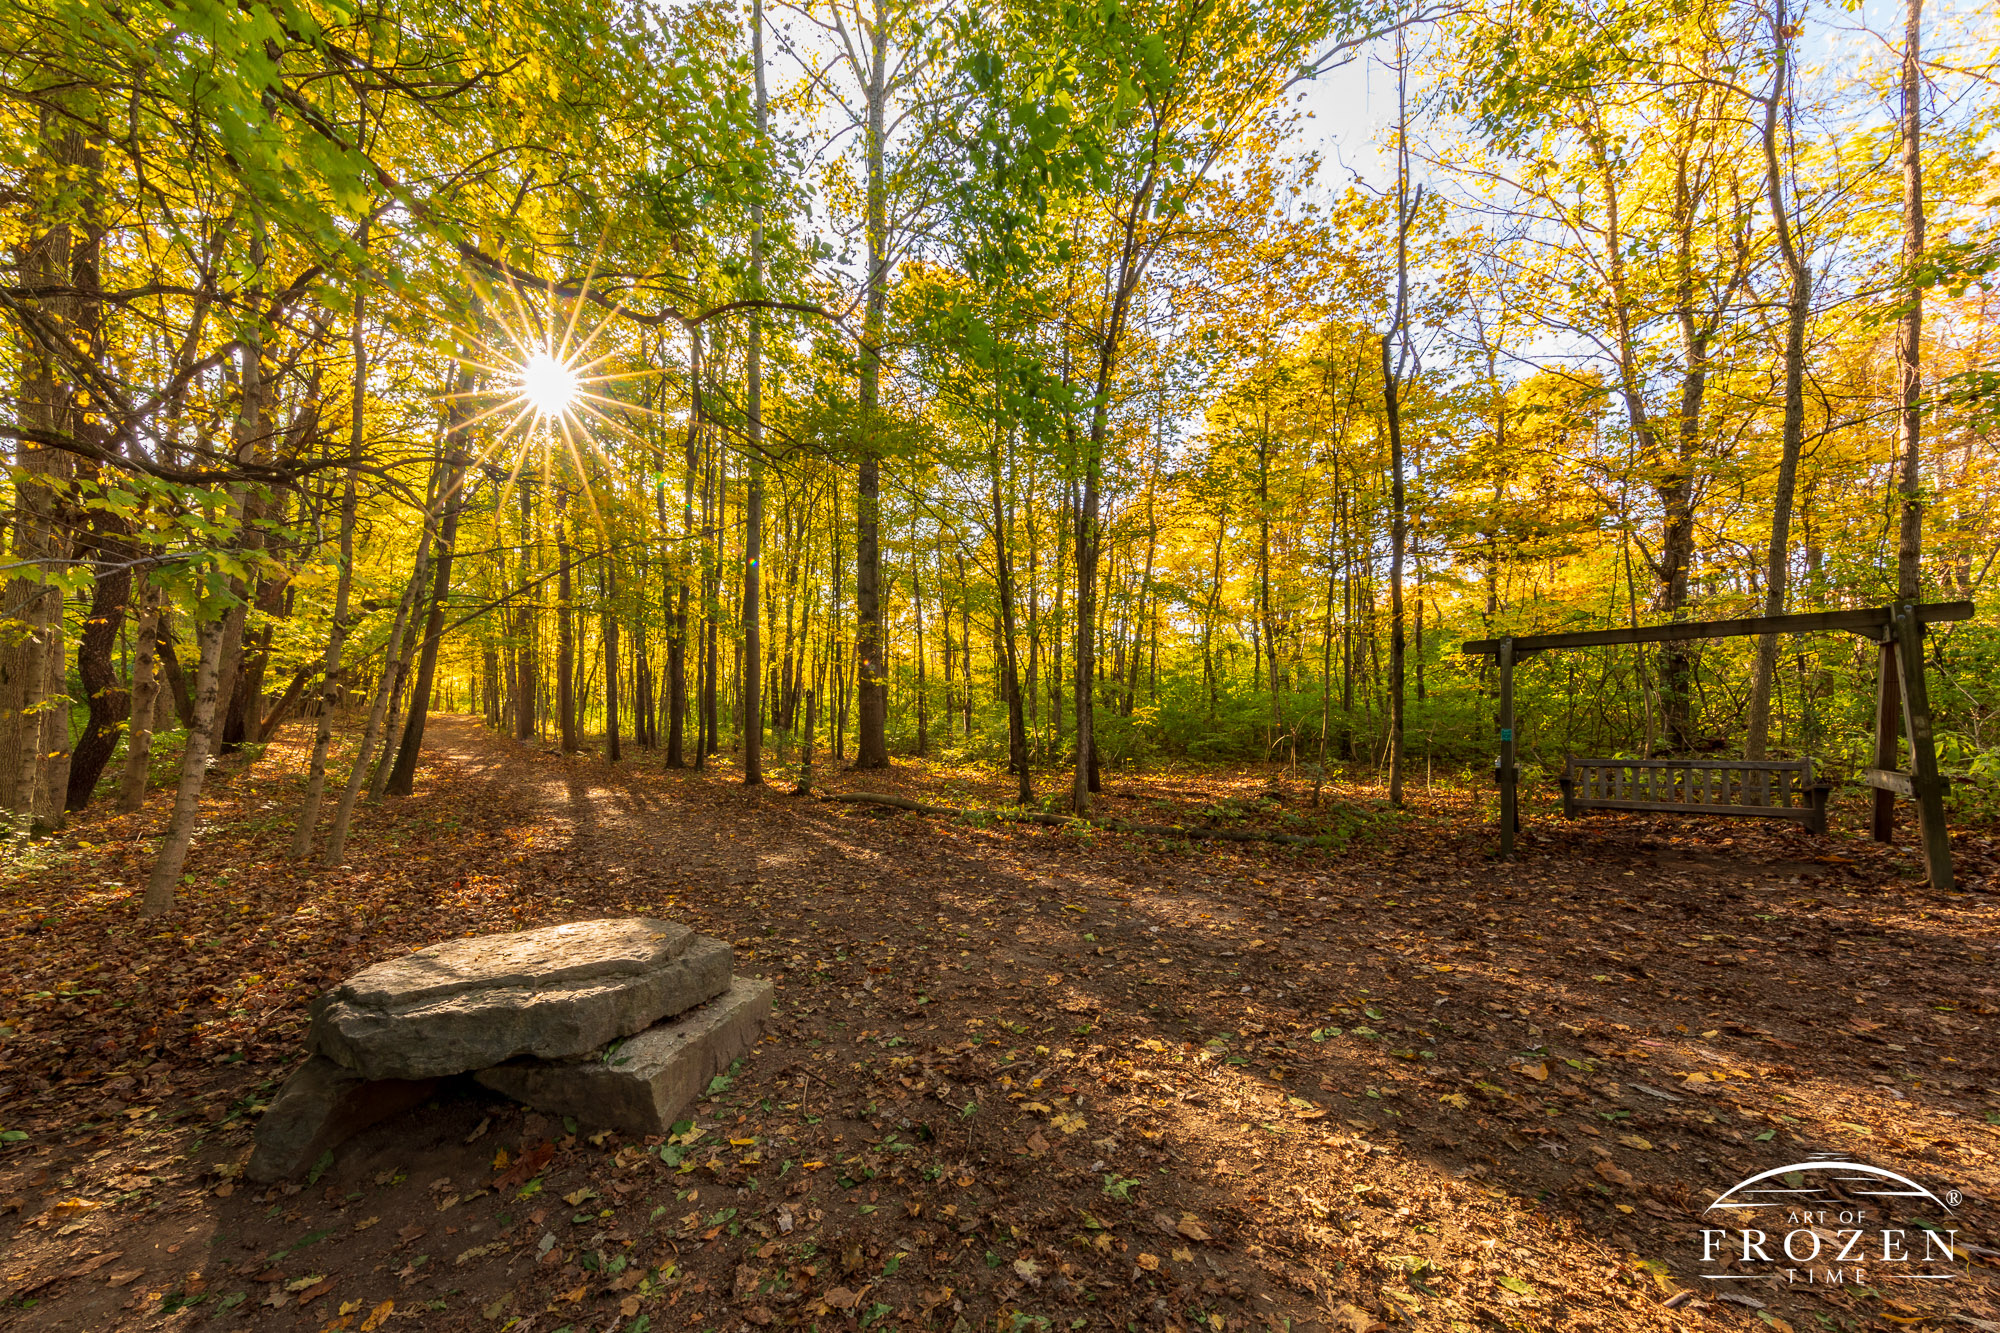 A stone resting spot at the foot of a trail extending through the forest during an autumn sunset